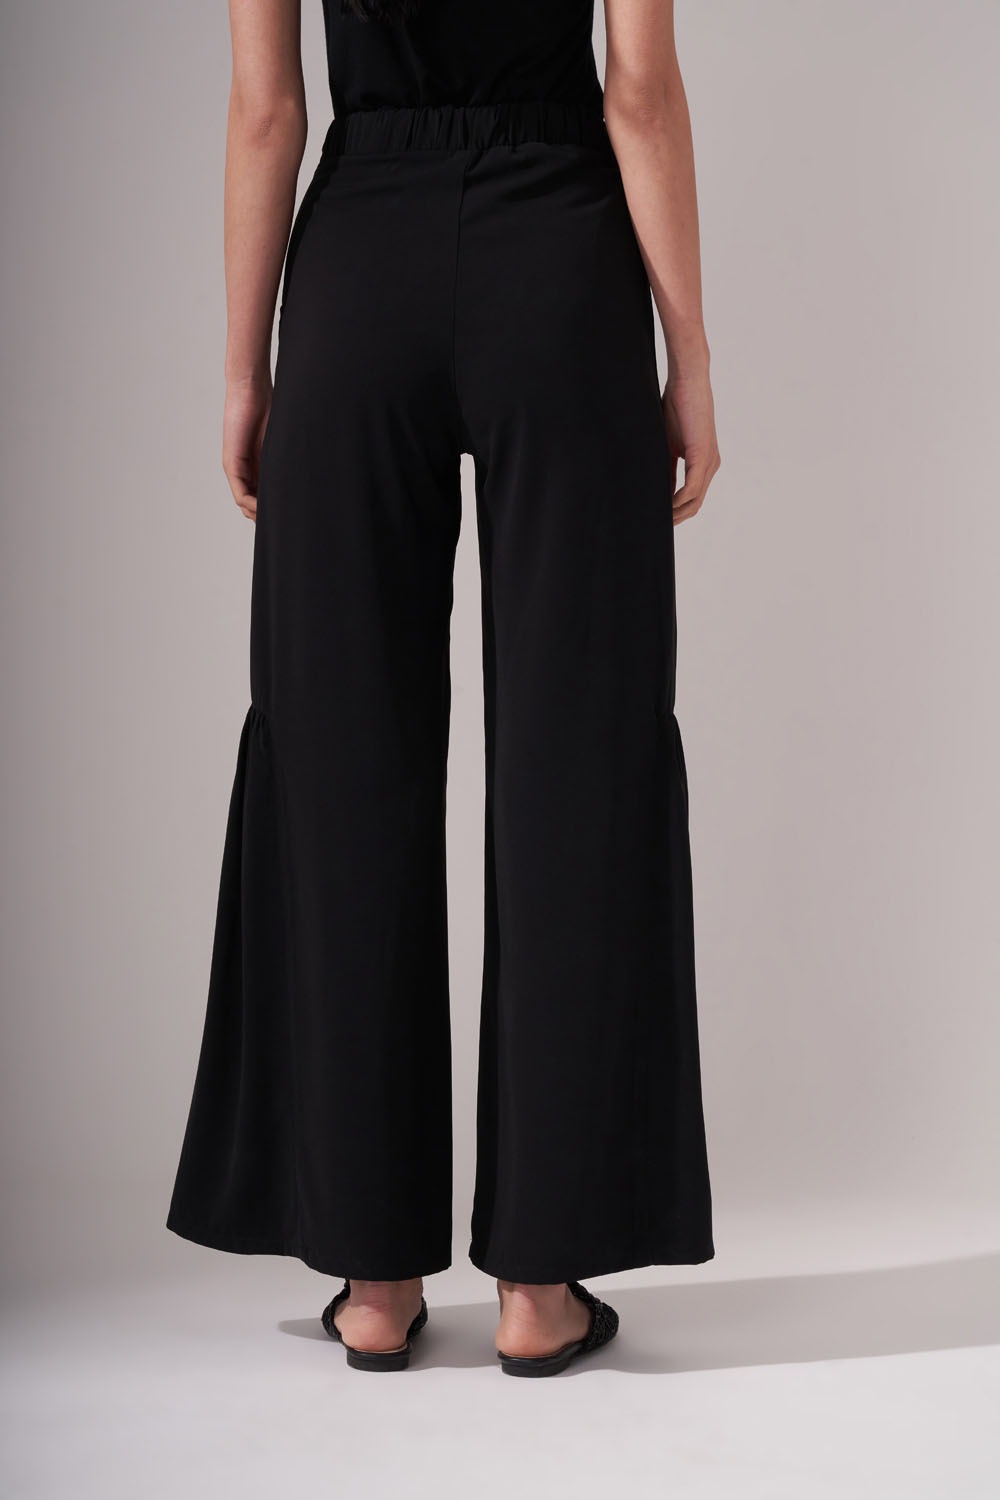 Design Detailed Trousers (Black)